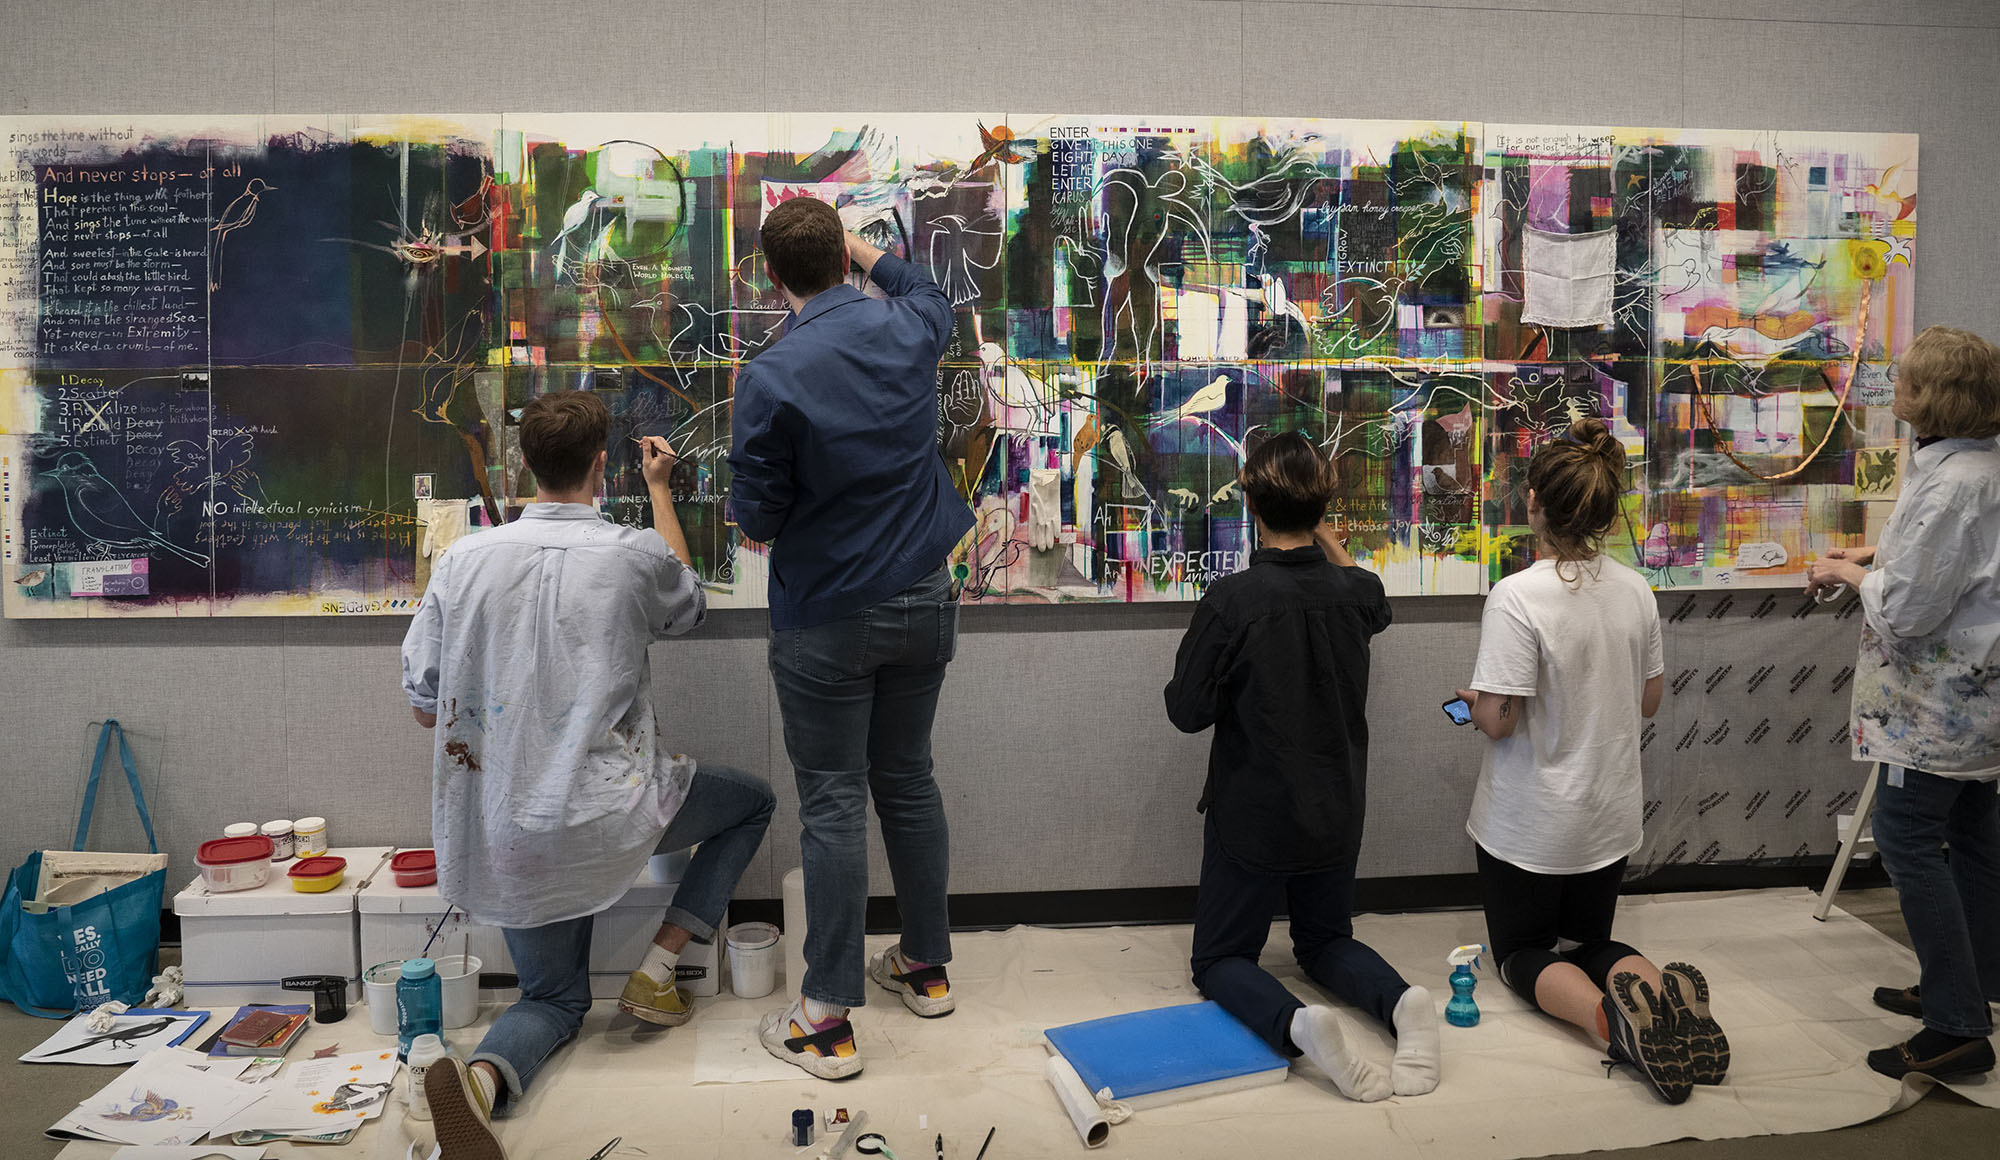 An image of five people working on a painting